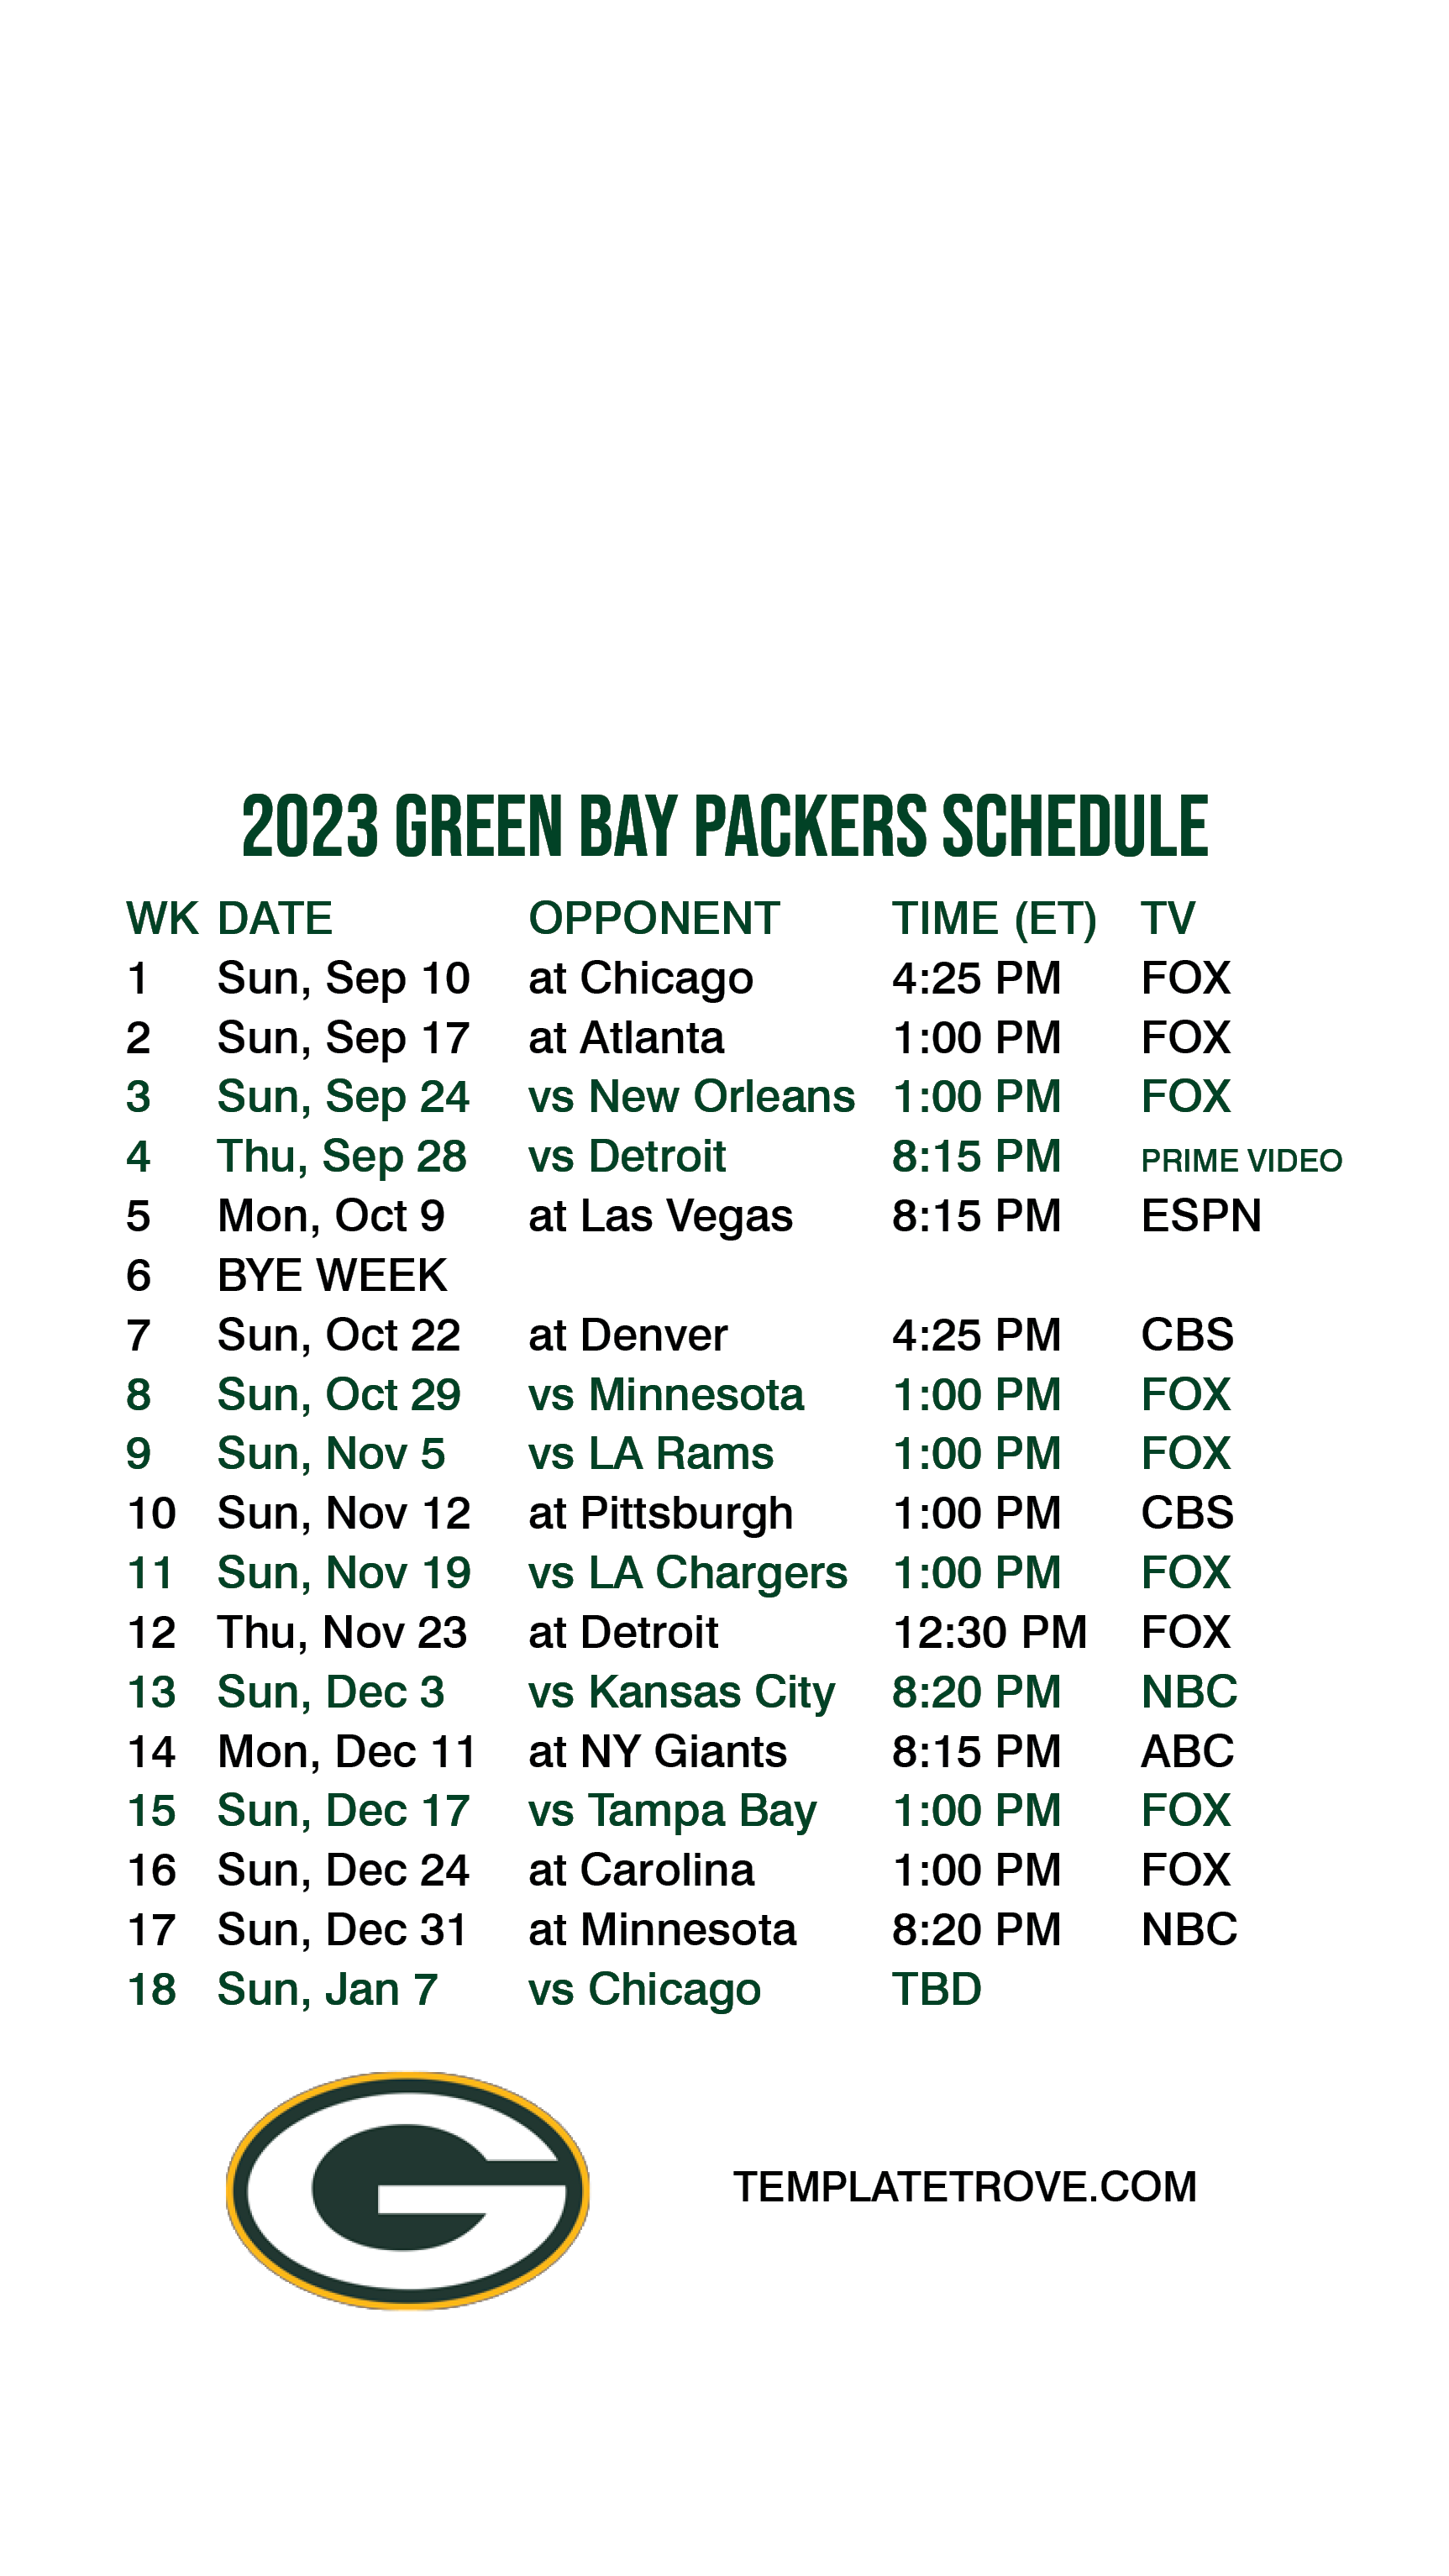 2023-2024 Green Bay Packers Lock Screen Schedule for iPhone 6-7-8 Plus